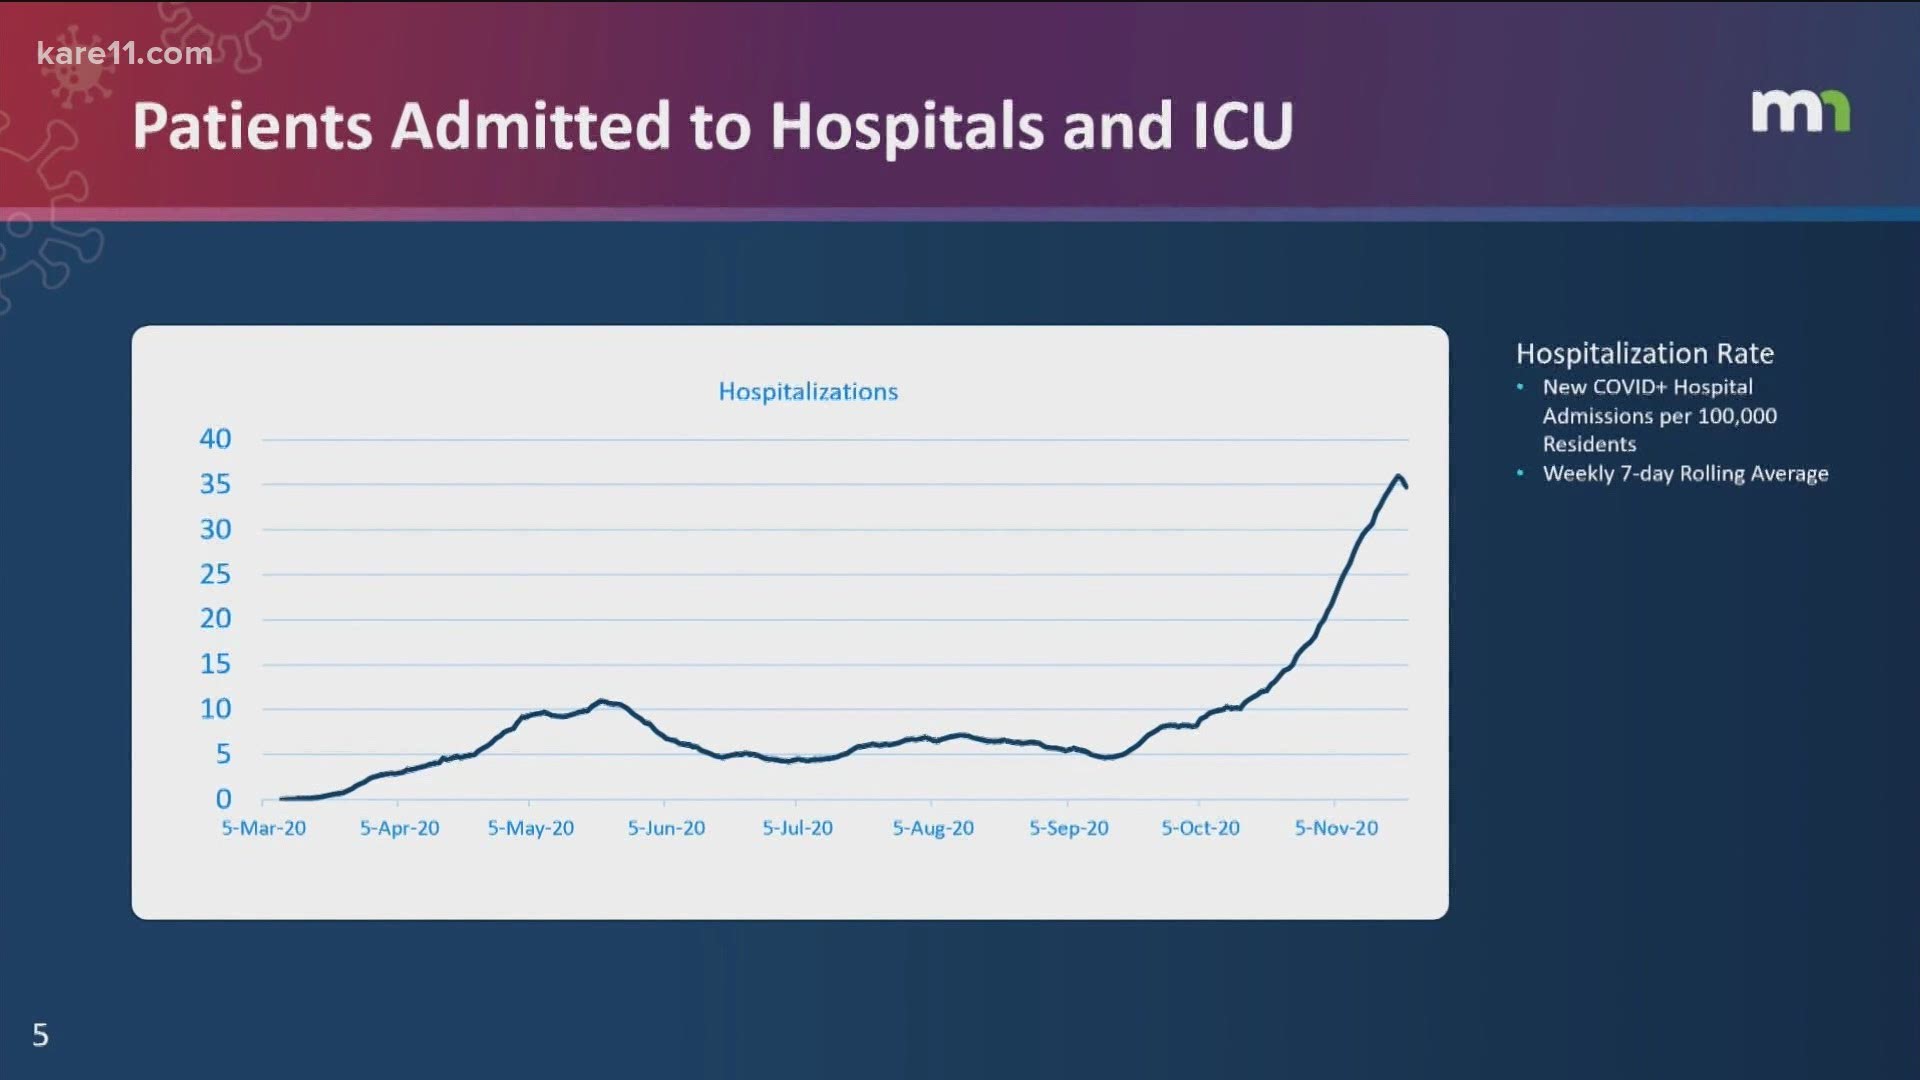 MDH officials say single day data from COVID-19 cases is not as important as long term trends and we may see a surge in cases in the coming weeks.